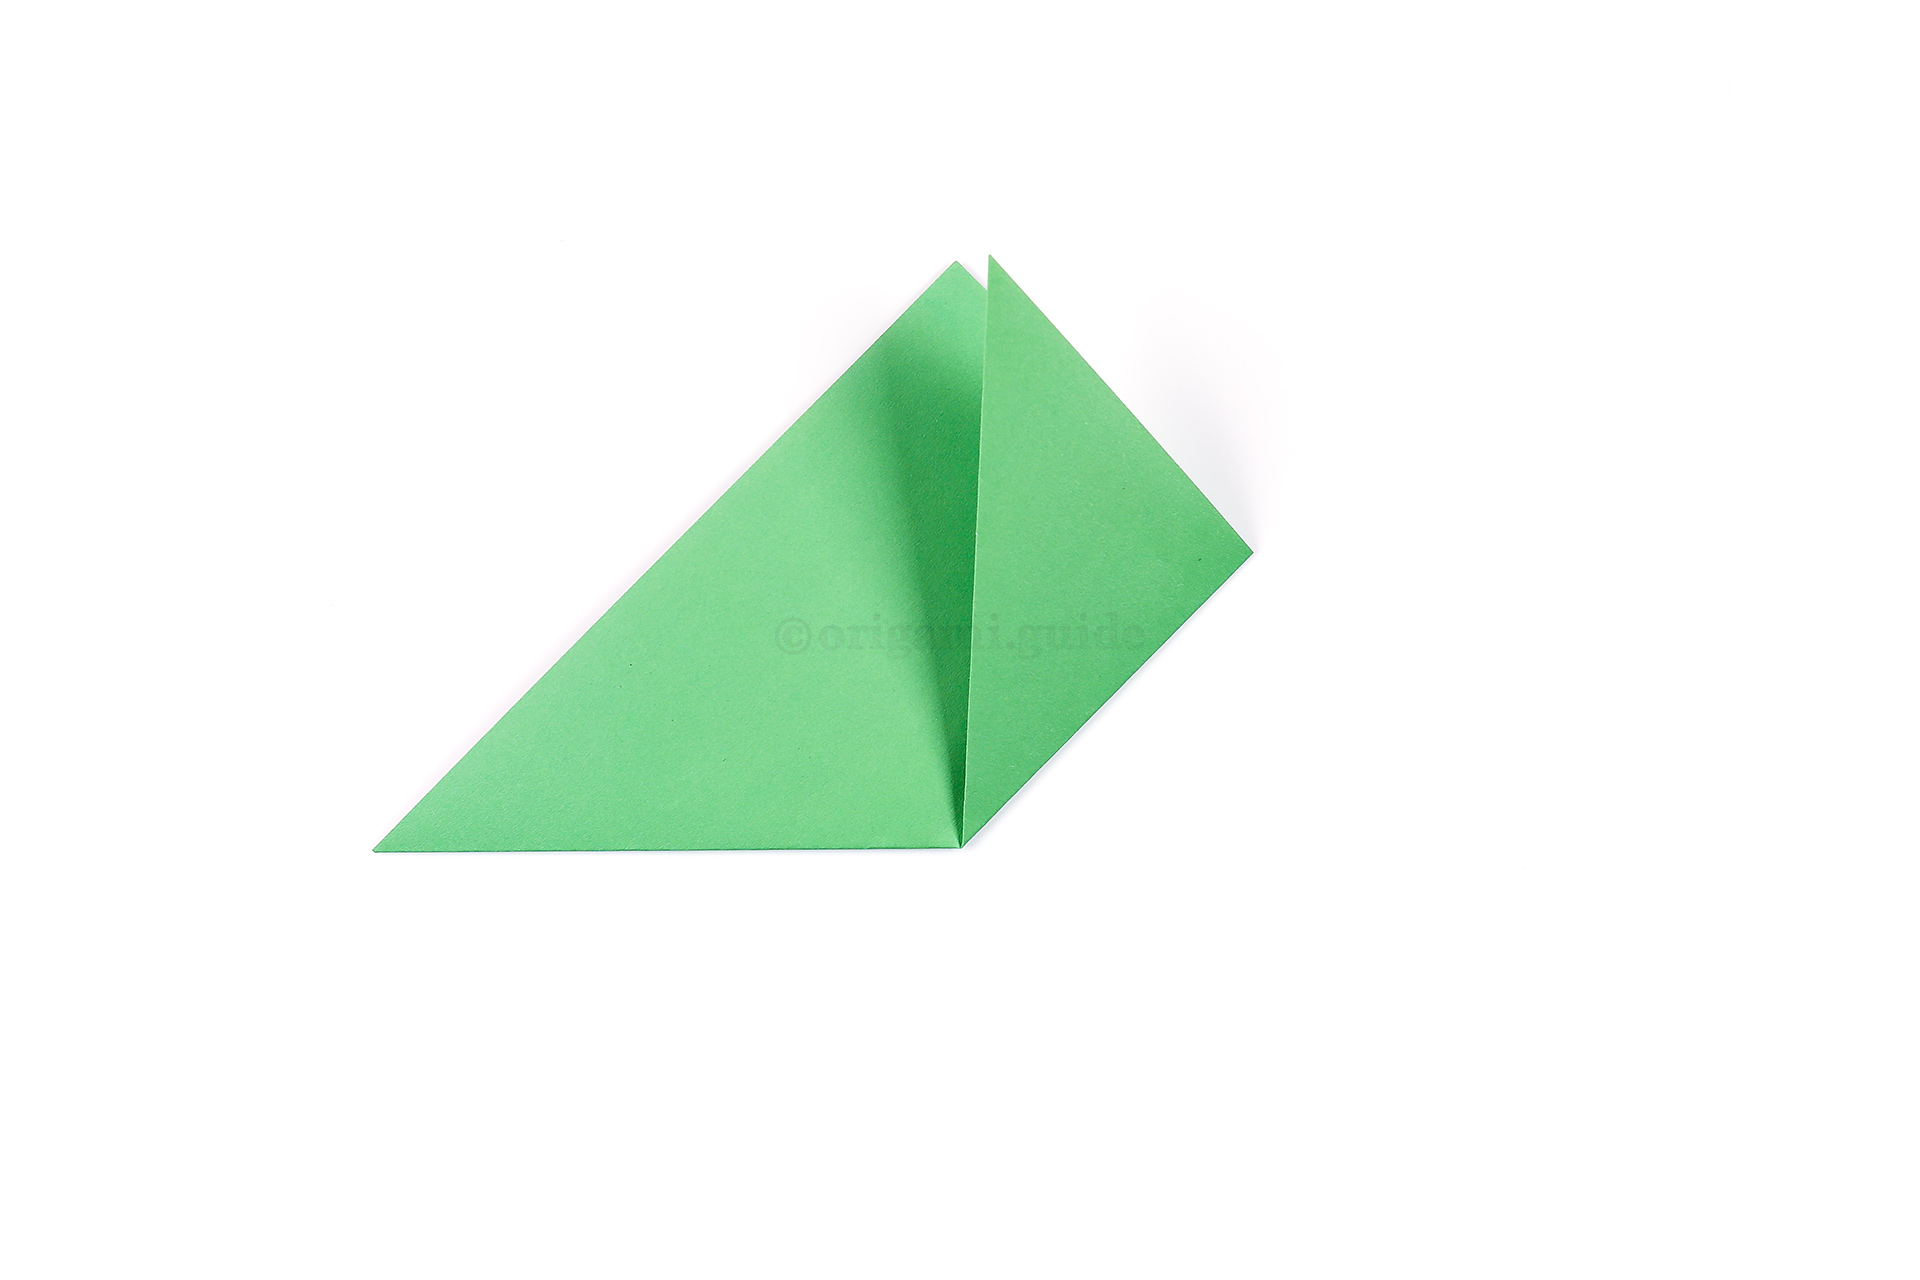 Next, fold the right point diagonally up to the top point.